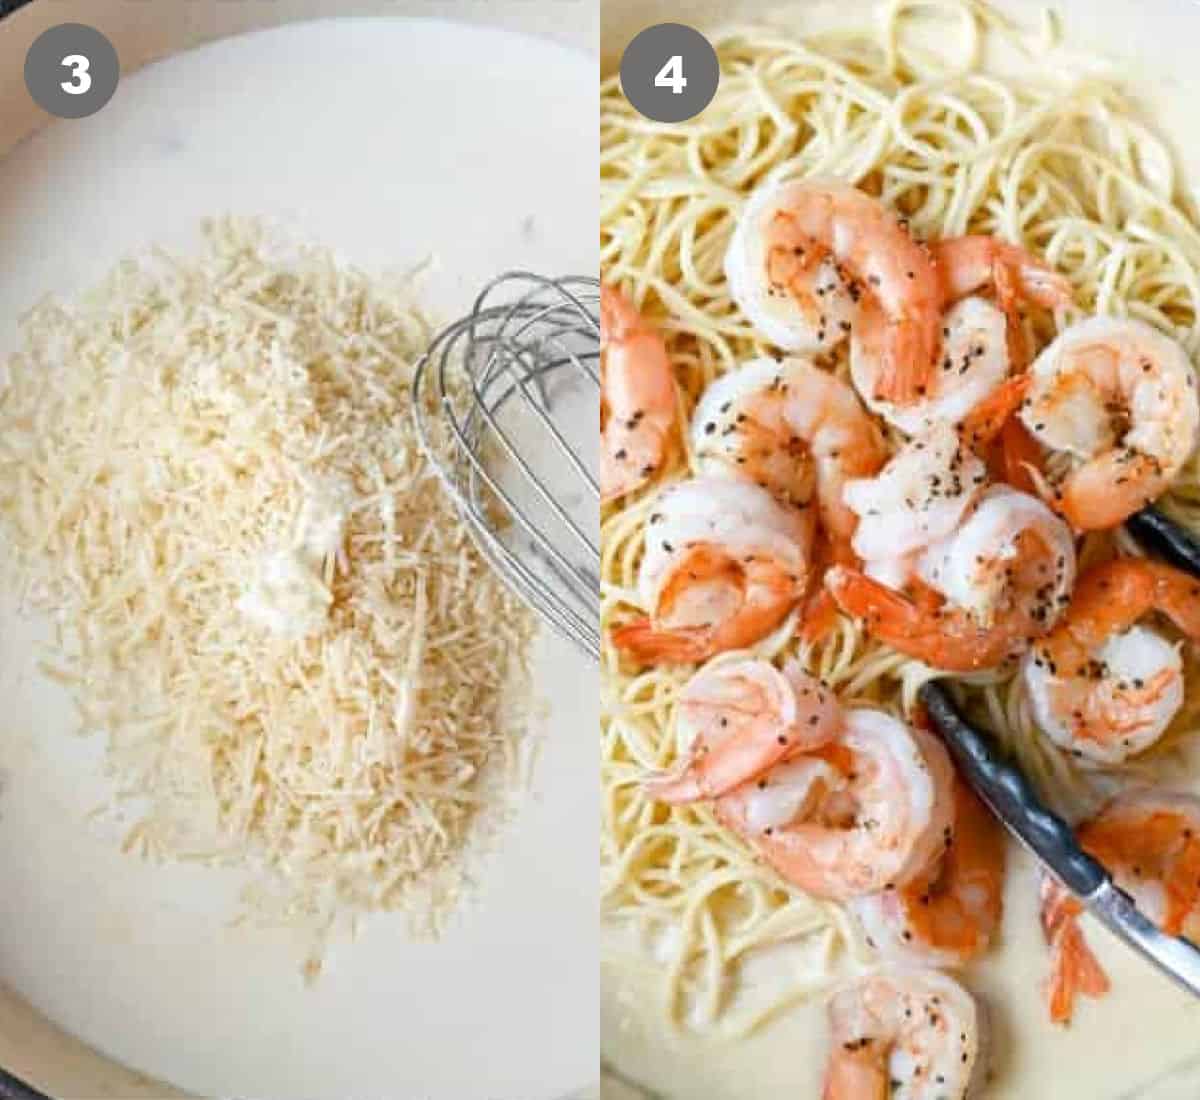 Cream and parmesan cheese added to the skilley. Then pasta and cooked shrimp tossed in.